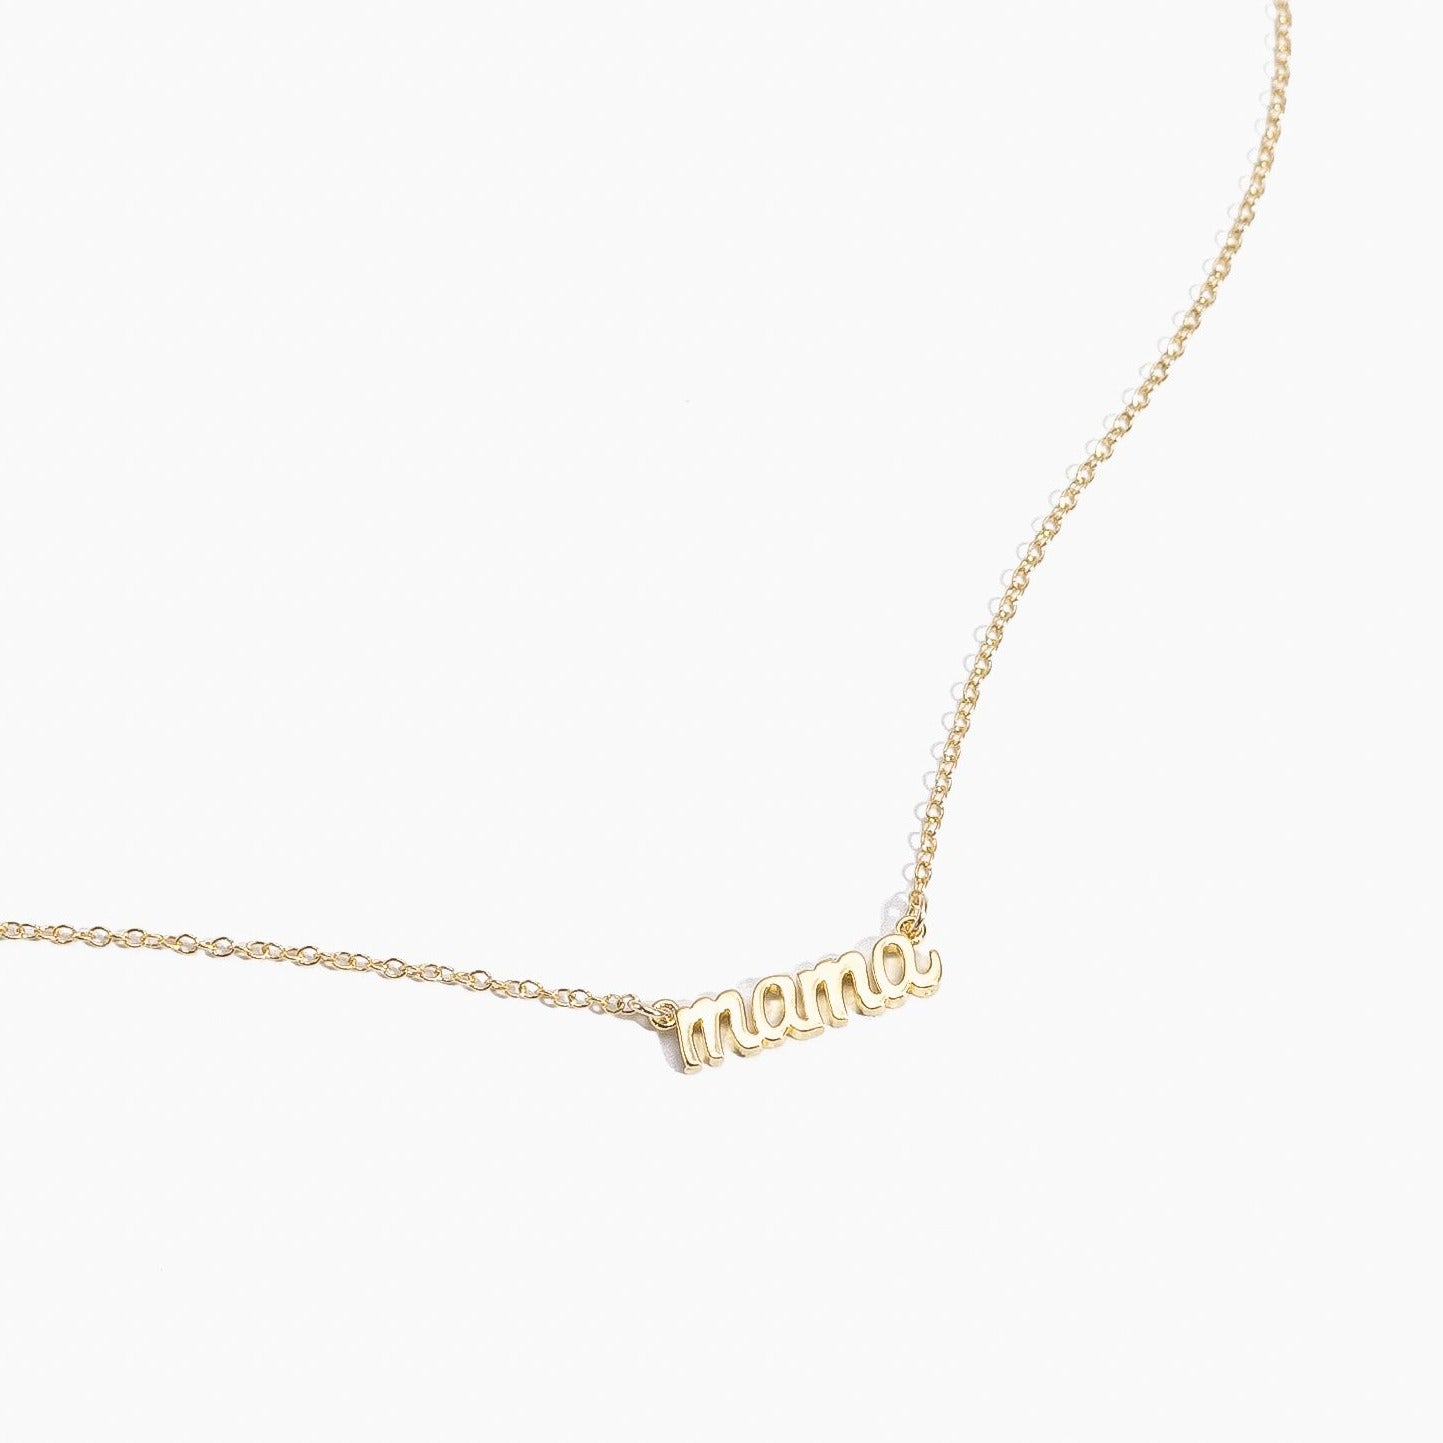 Gold Mama Necklace by Katie Dean Jewelry, made in America, perfect for the dainty minimal jewelry lovers 